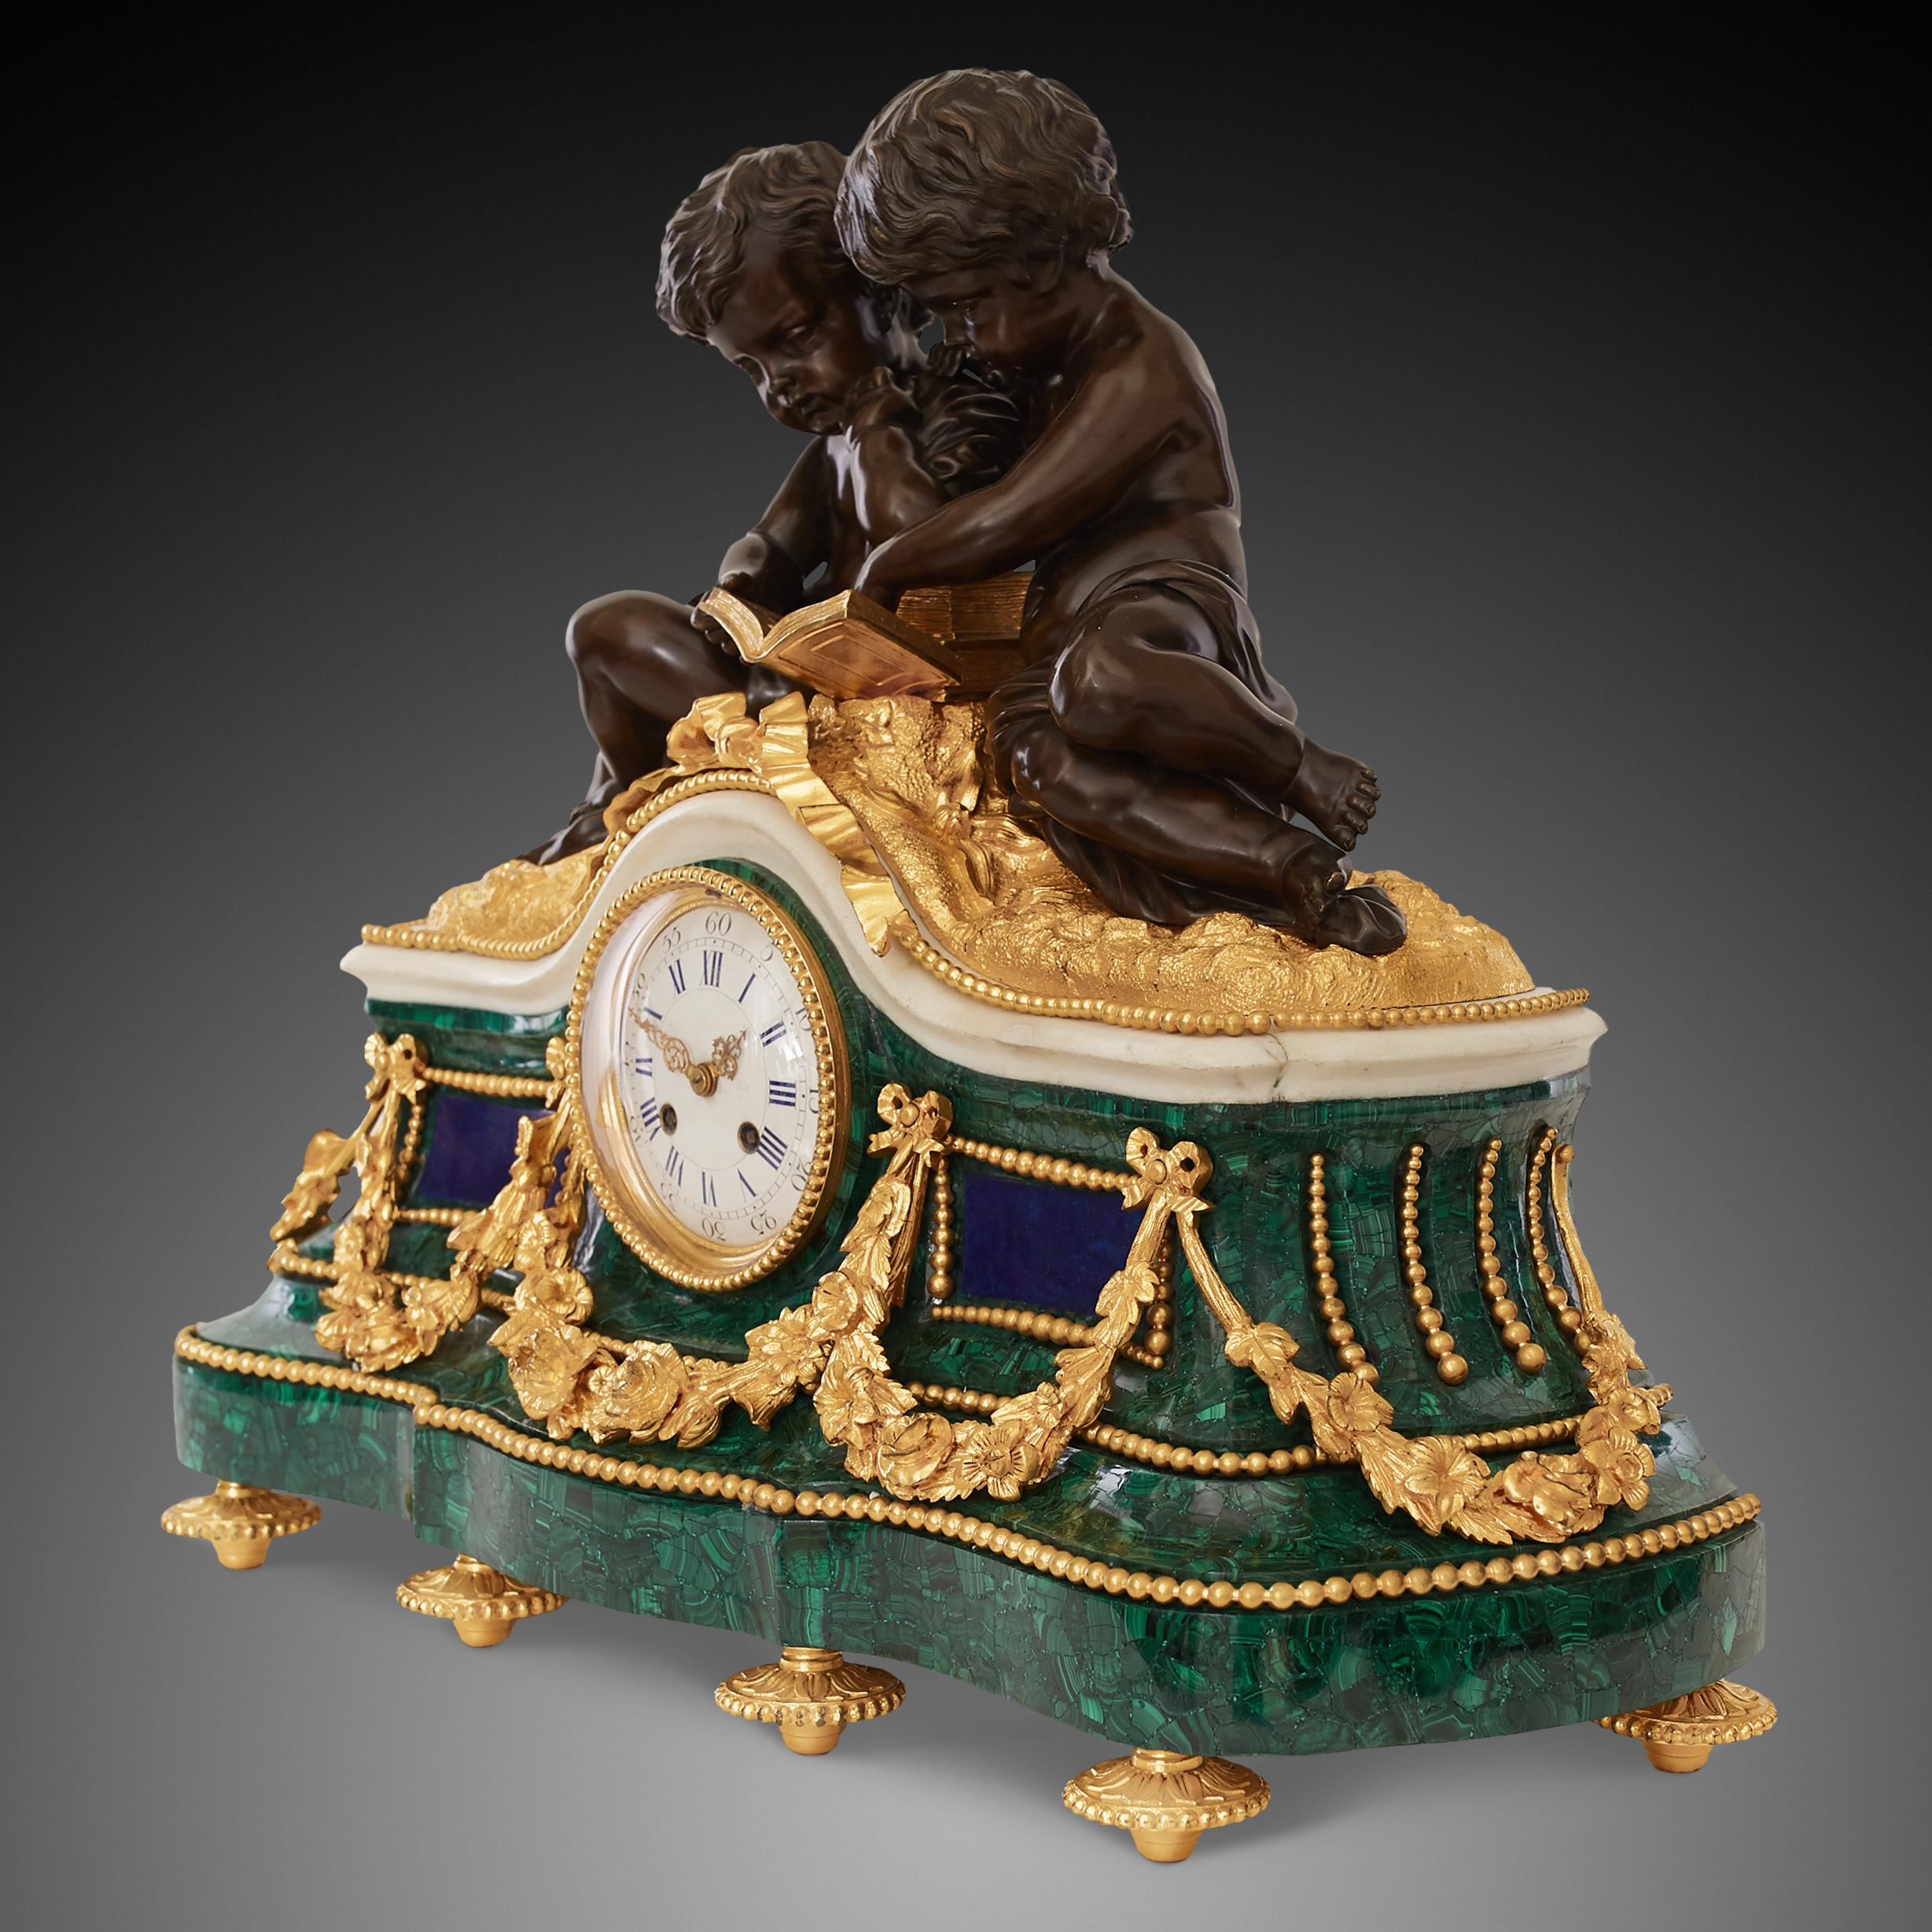 Antique late 19th c. French mantel clock crafted in Louis XVI style richly ornamented with ormolu flower garlands, bows and beaded lines all around the clock’s case. The main feature of this mantel clock is two putti figures reading a book made with